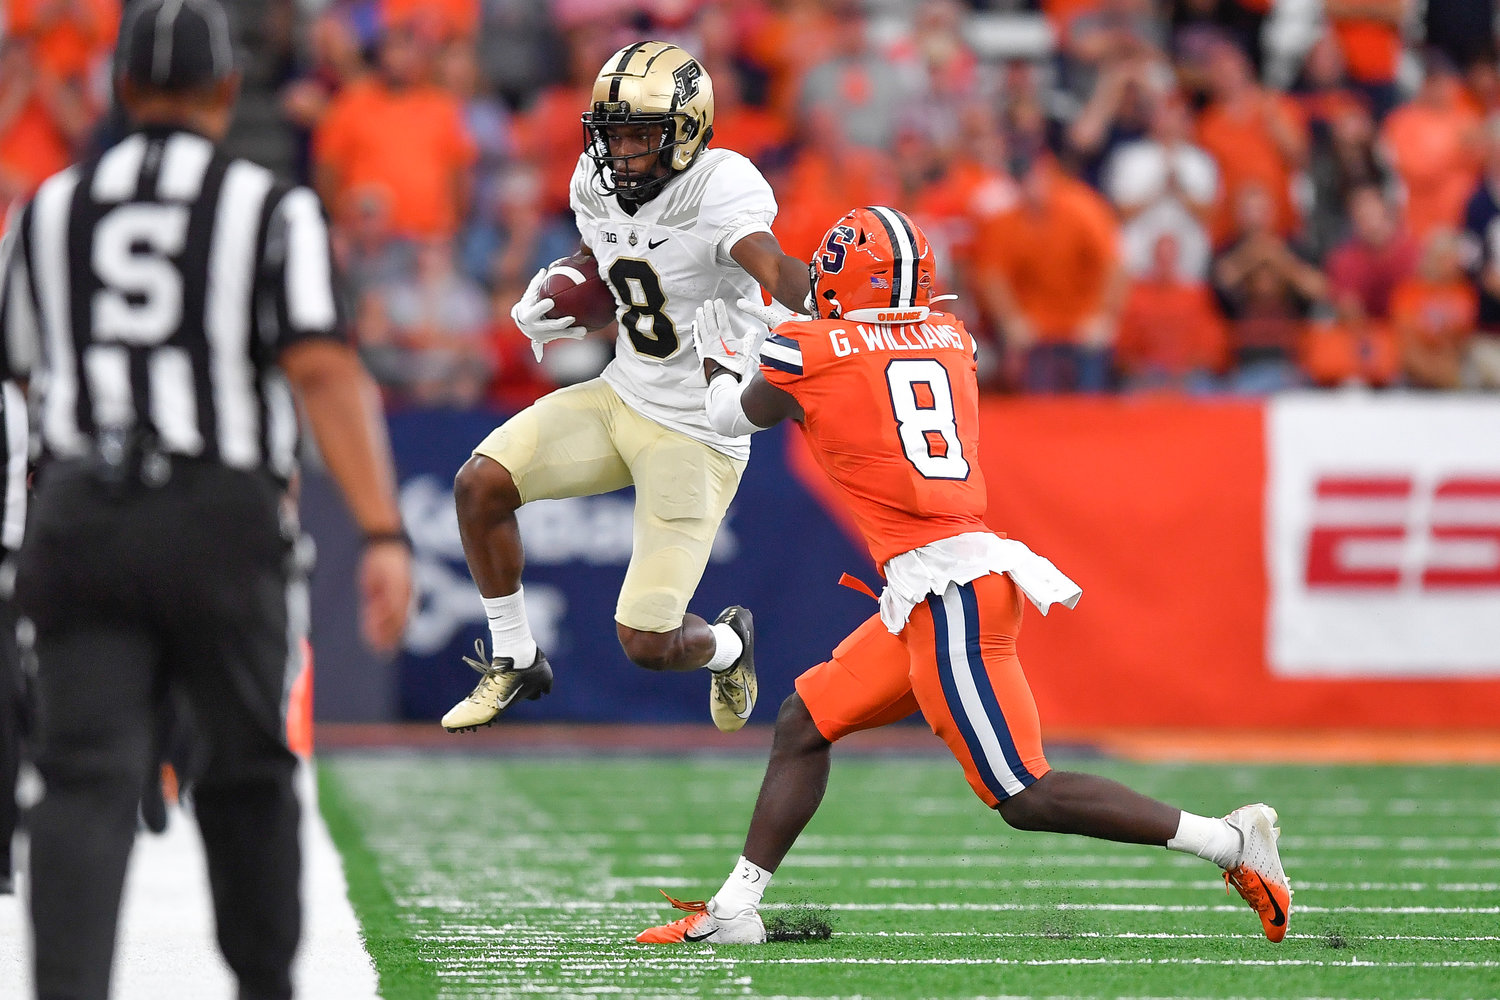 Purdue wide receiver TJ Sheffield, left, jumps out of bounds after a catch against Syracuse defensive back Garrett Williams during the second half of an NCAA college football game in Syracuse, N.Y., Saturday, Sept. 17, 2022.